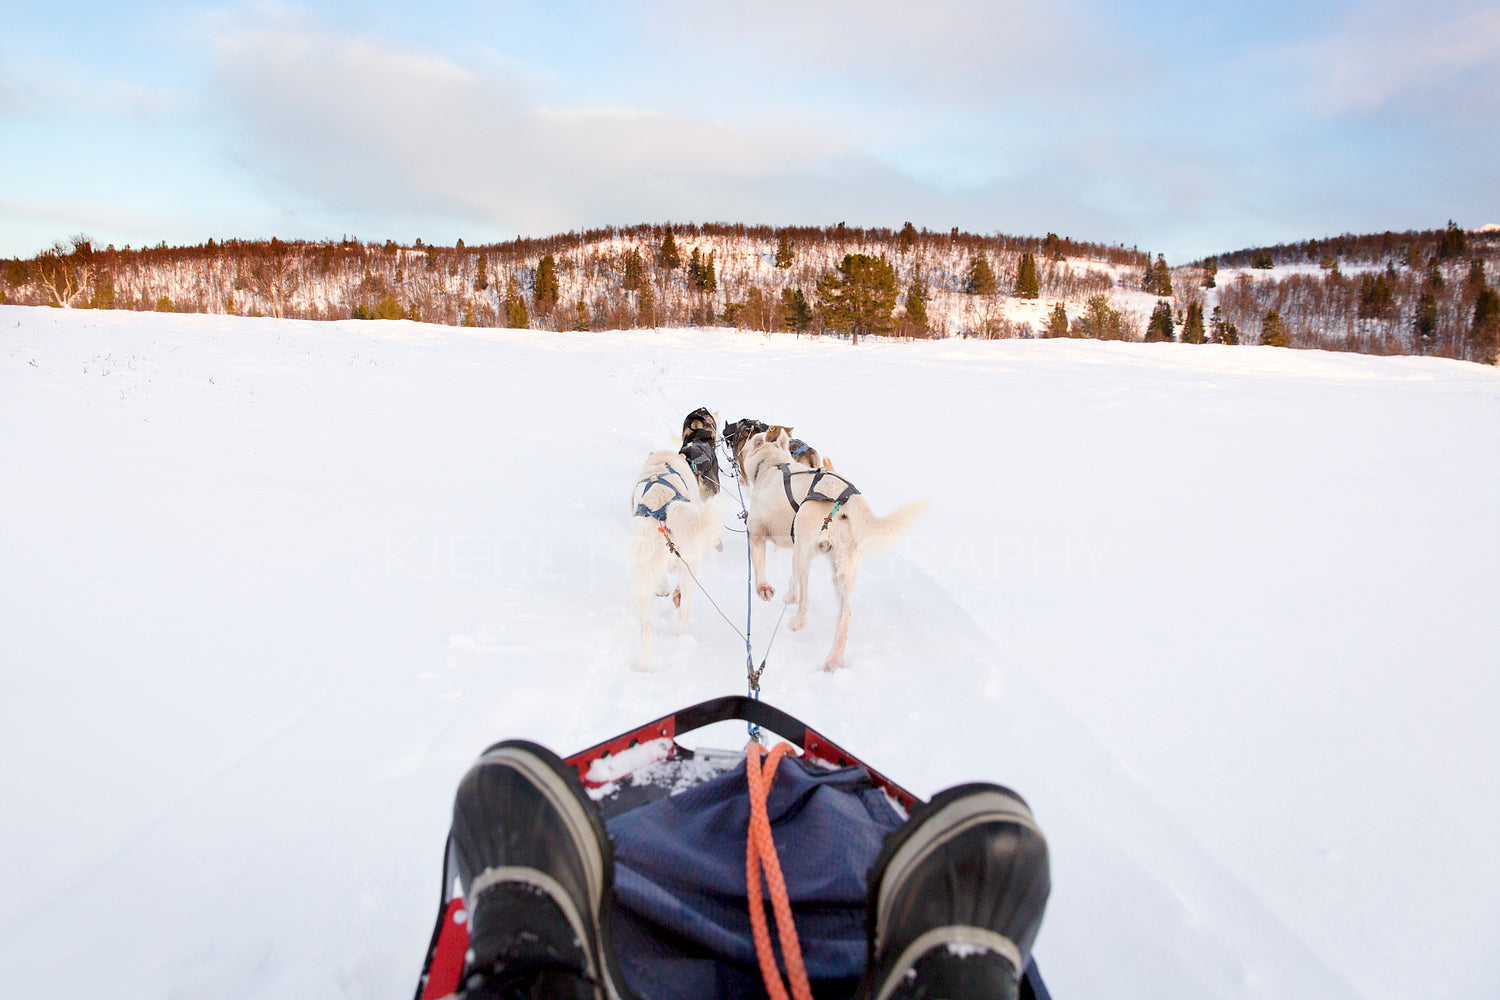 Sledding with husky dogs in the winter